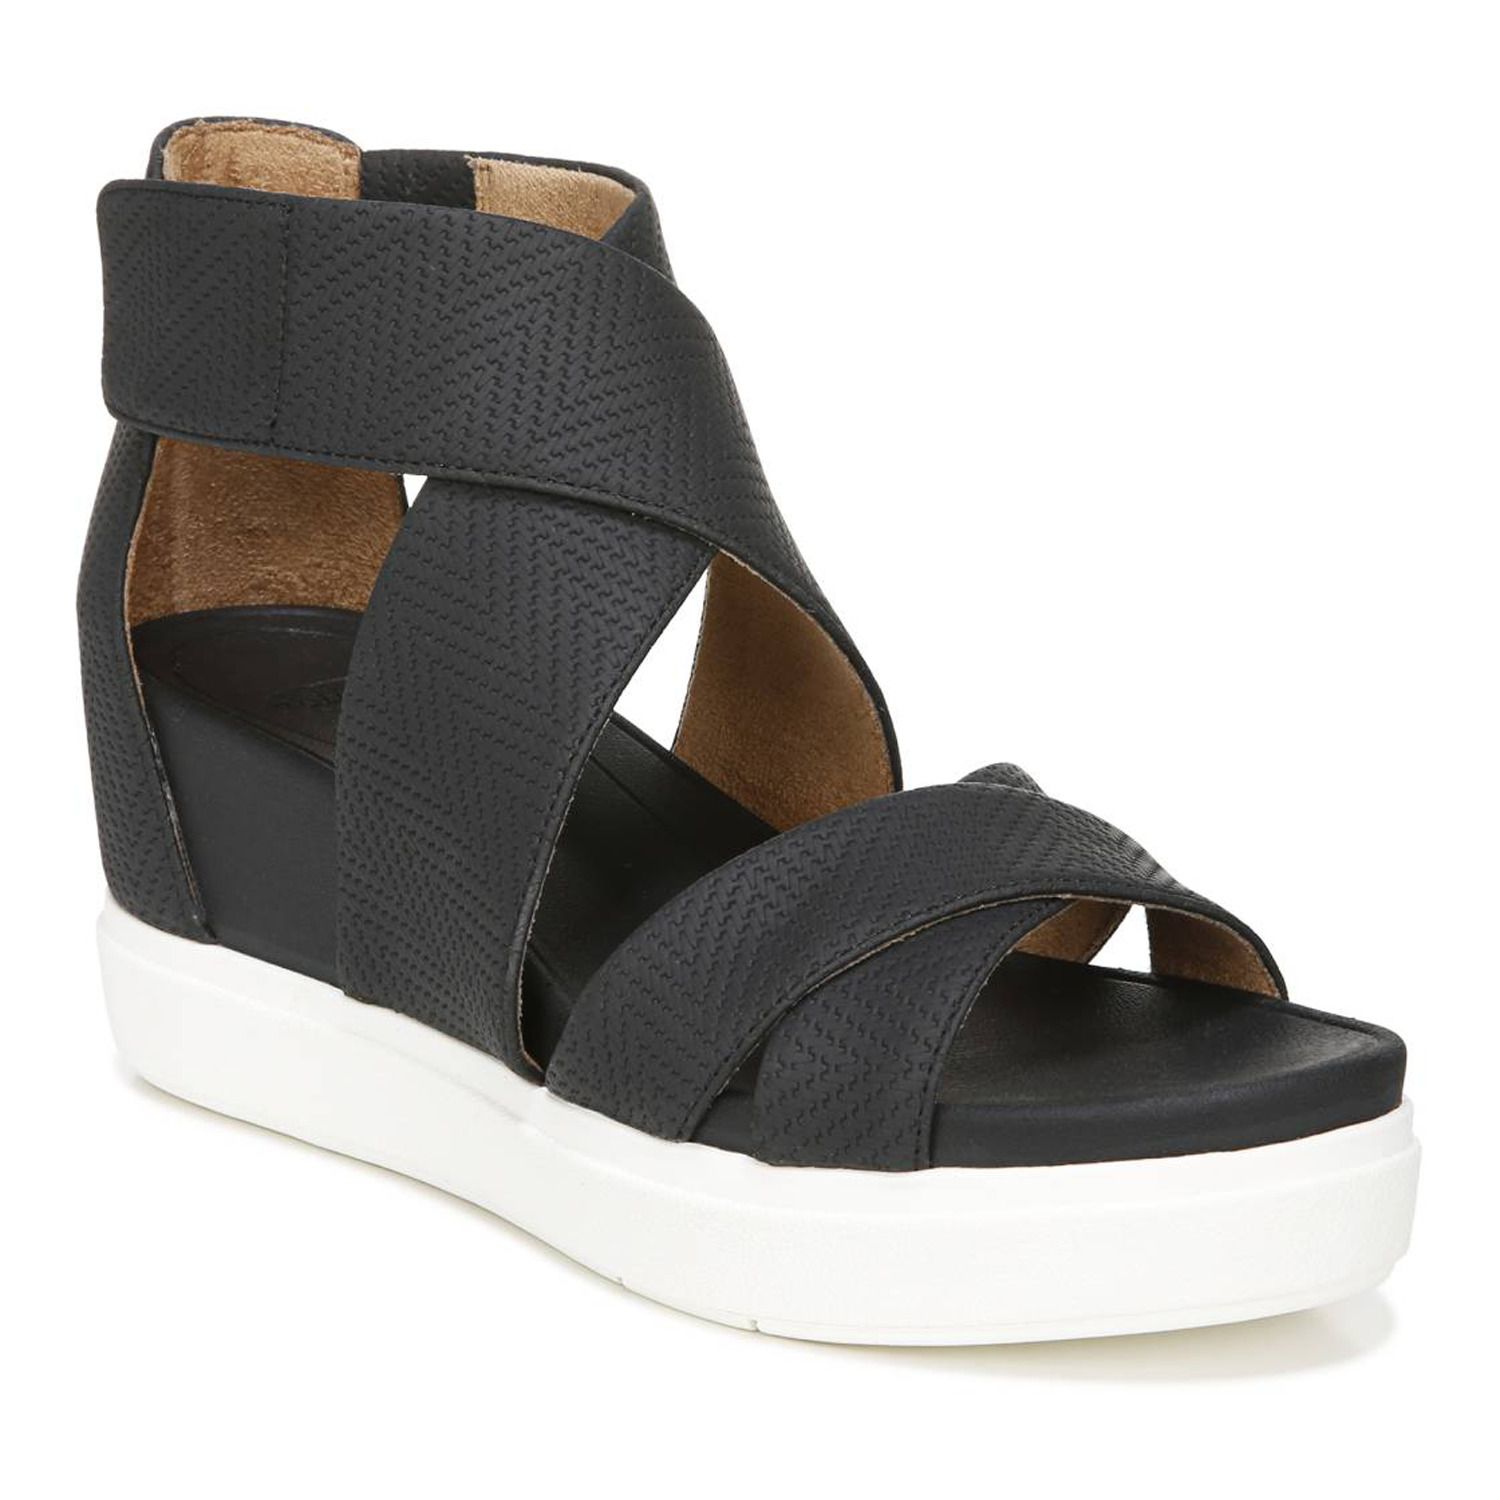 dr scholl's go for it wedge sandal